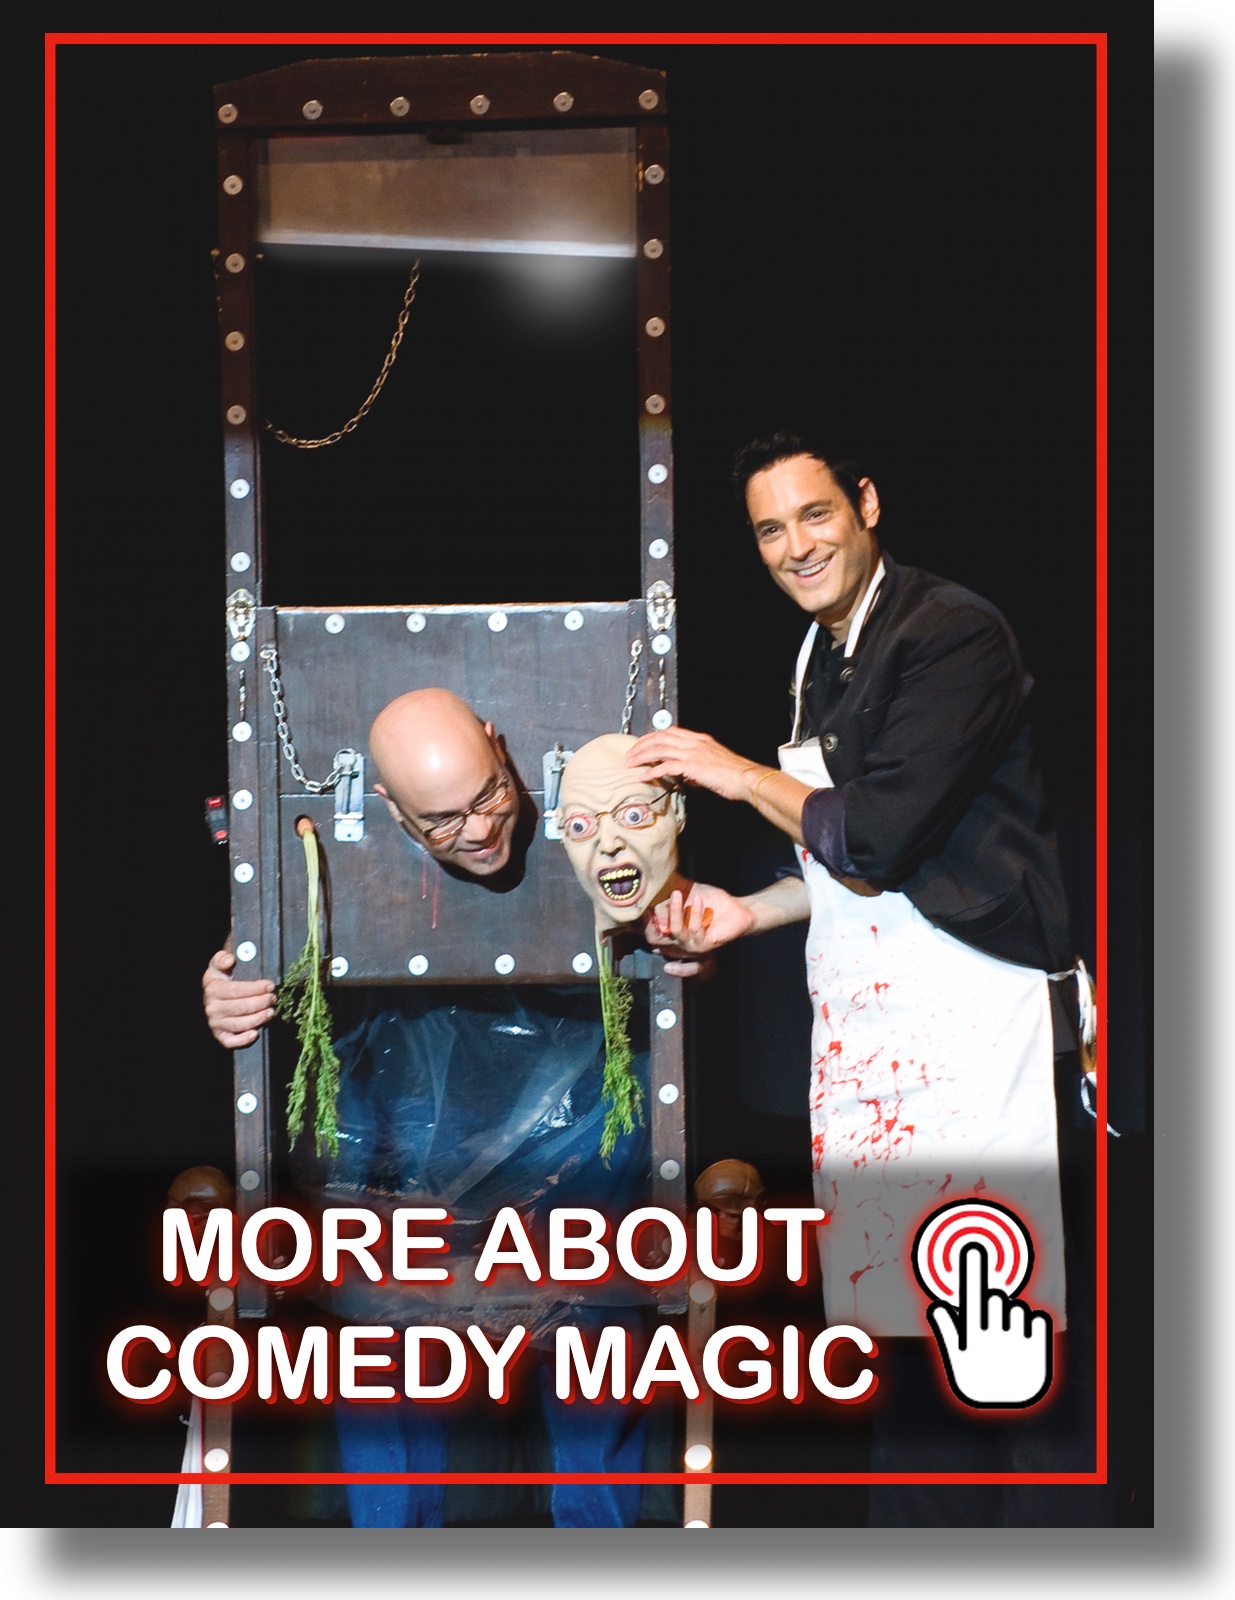 Comedy Guillotine Clickable Clean Comedy Magician Corporate Comedy Magician For Private Events and Trade Shows in Palm Beach, Coral Gables, Coconut Grove, Key West, Naples, Key Largo and Pinecrest Florida